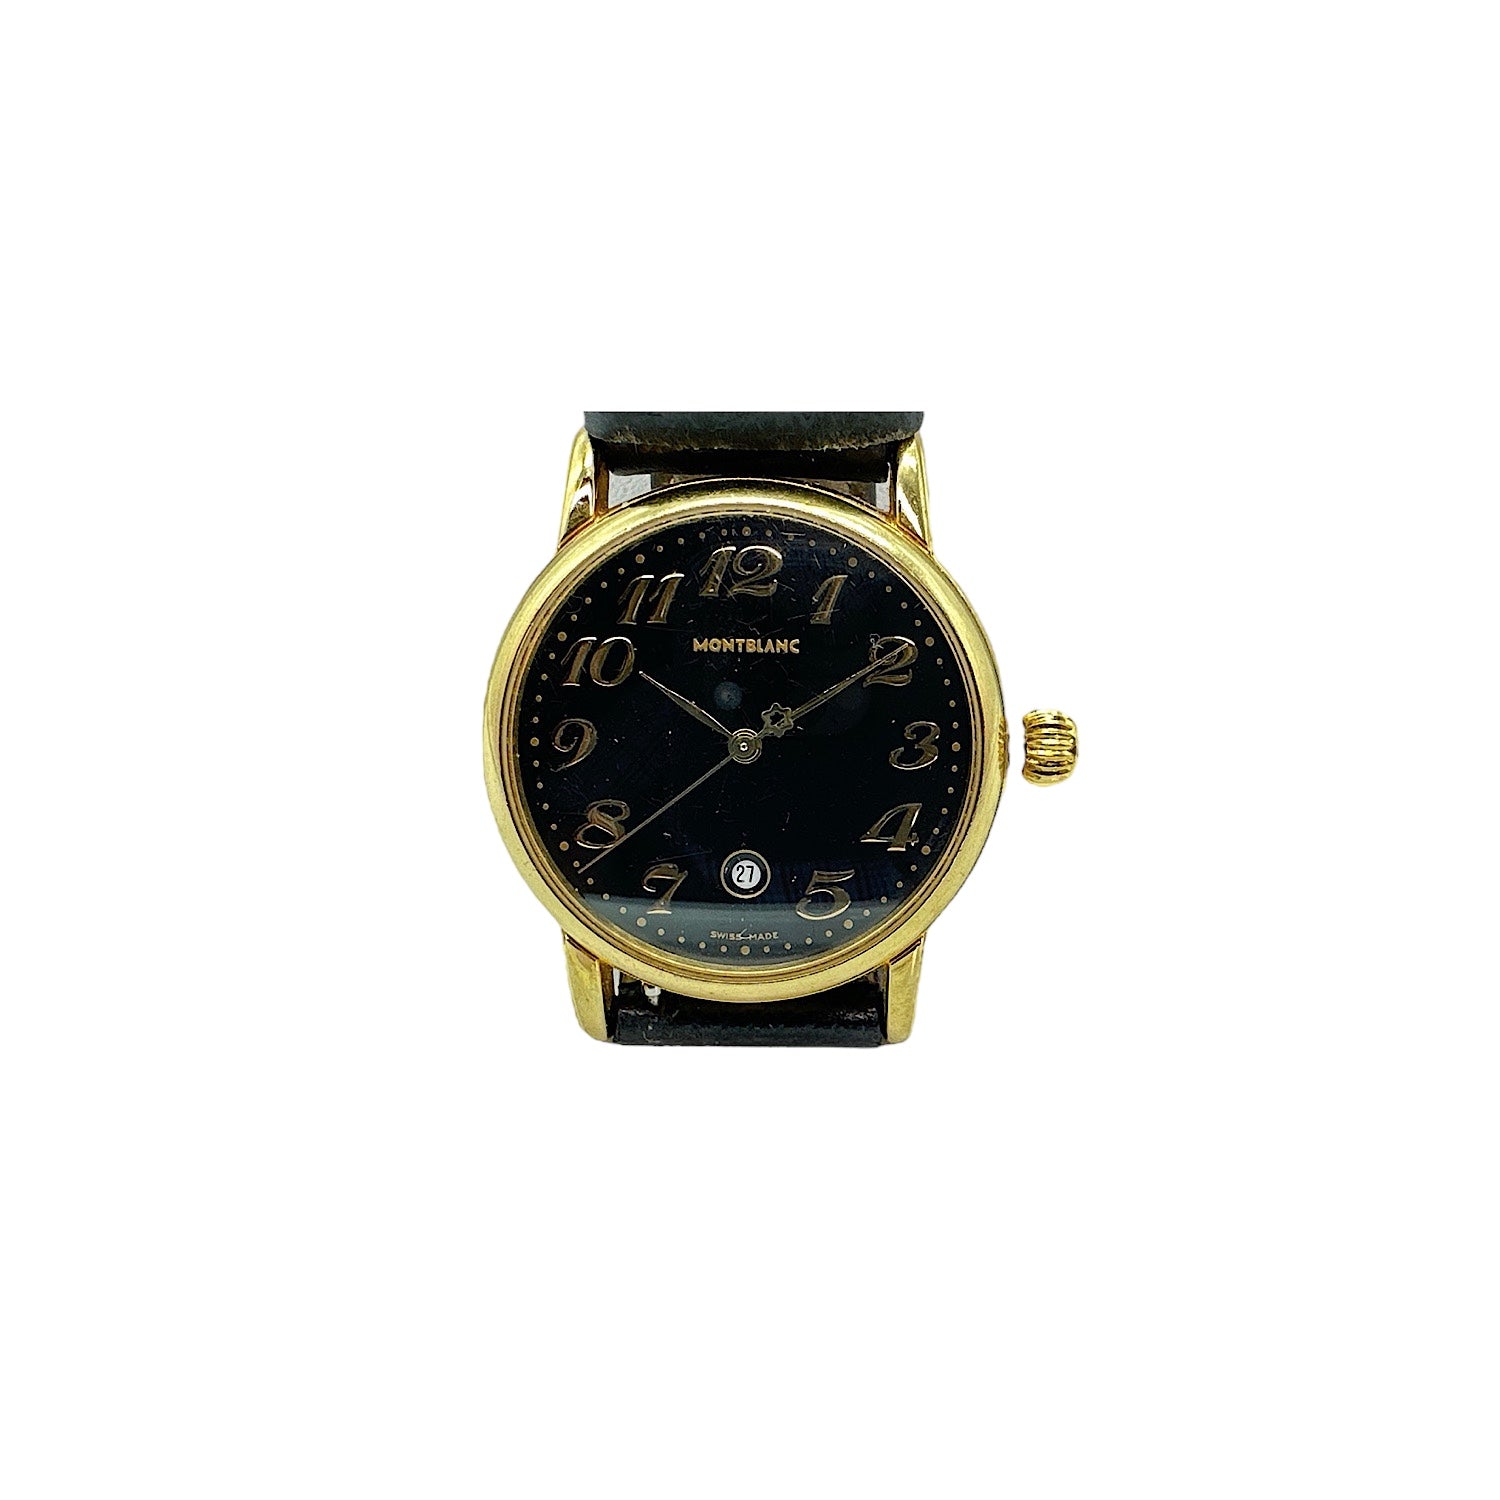 Montblanc Meisterstuck Gold-Plated Women's Watch - Model 7005 - TheRelux.com